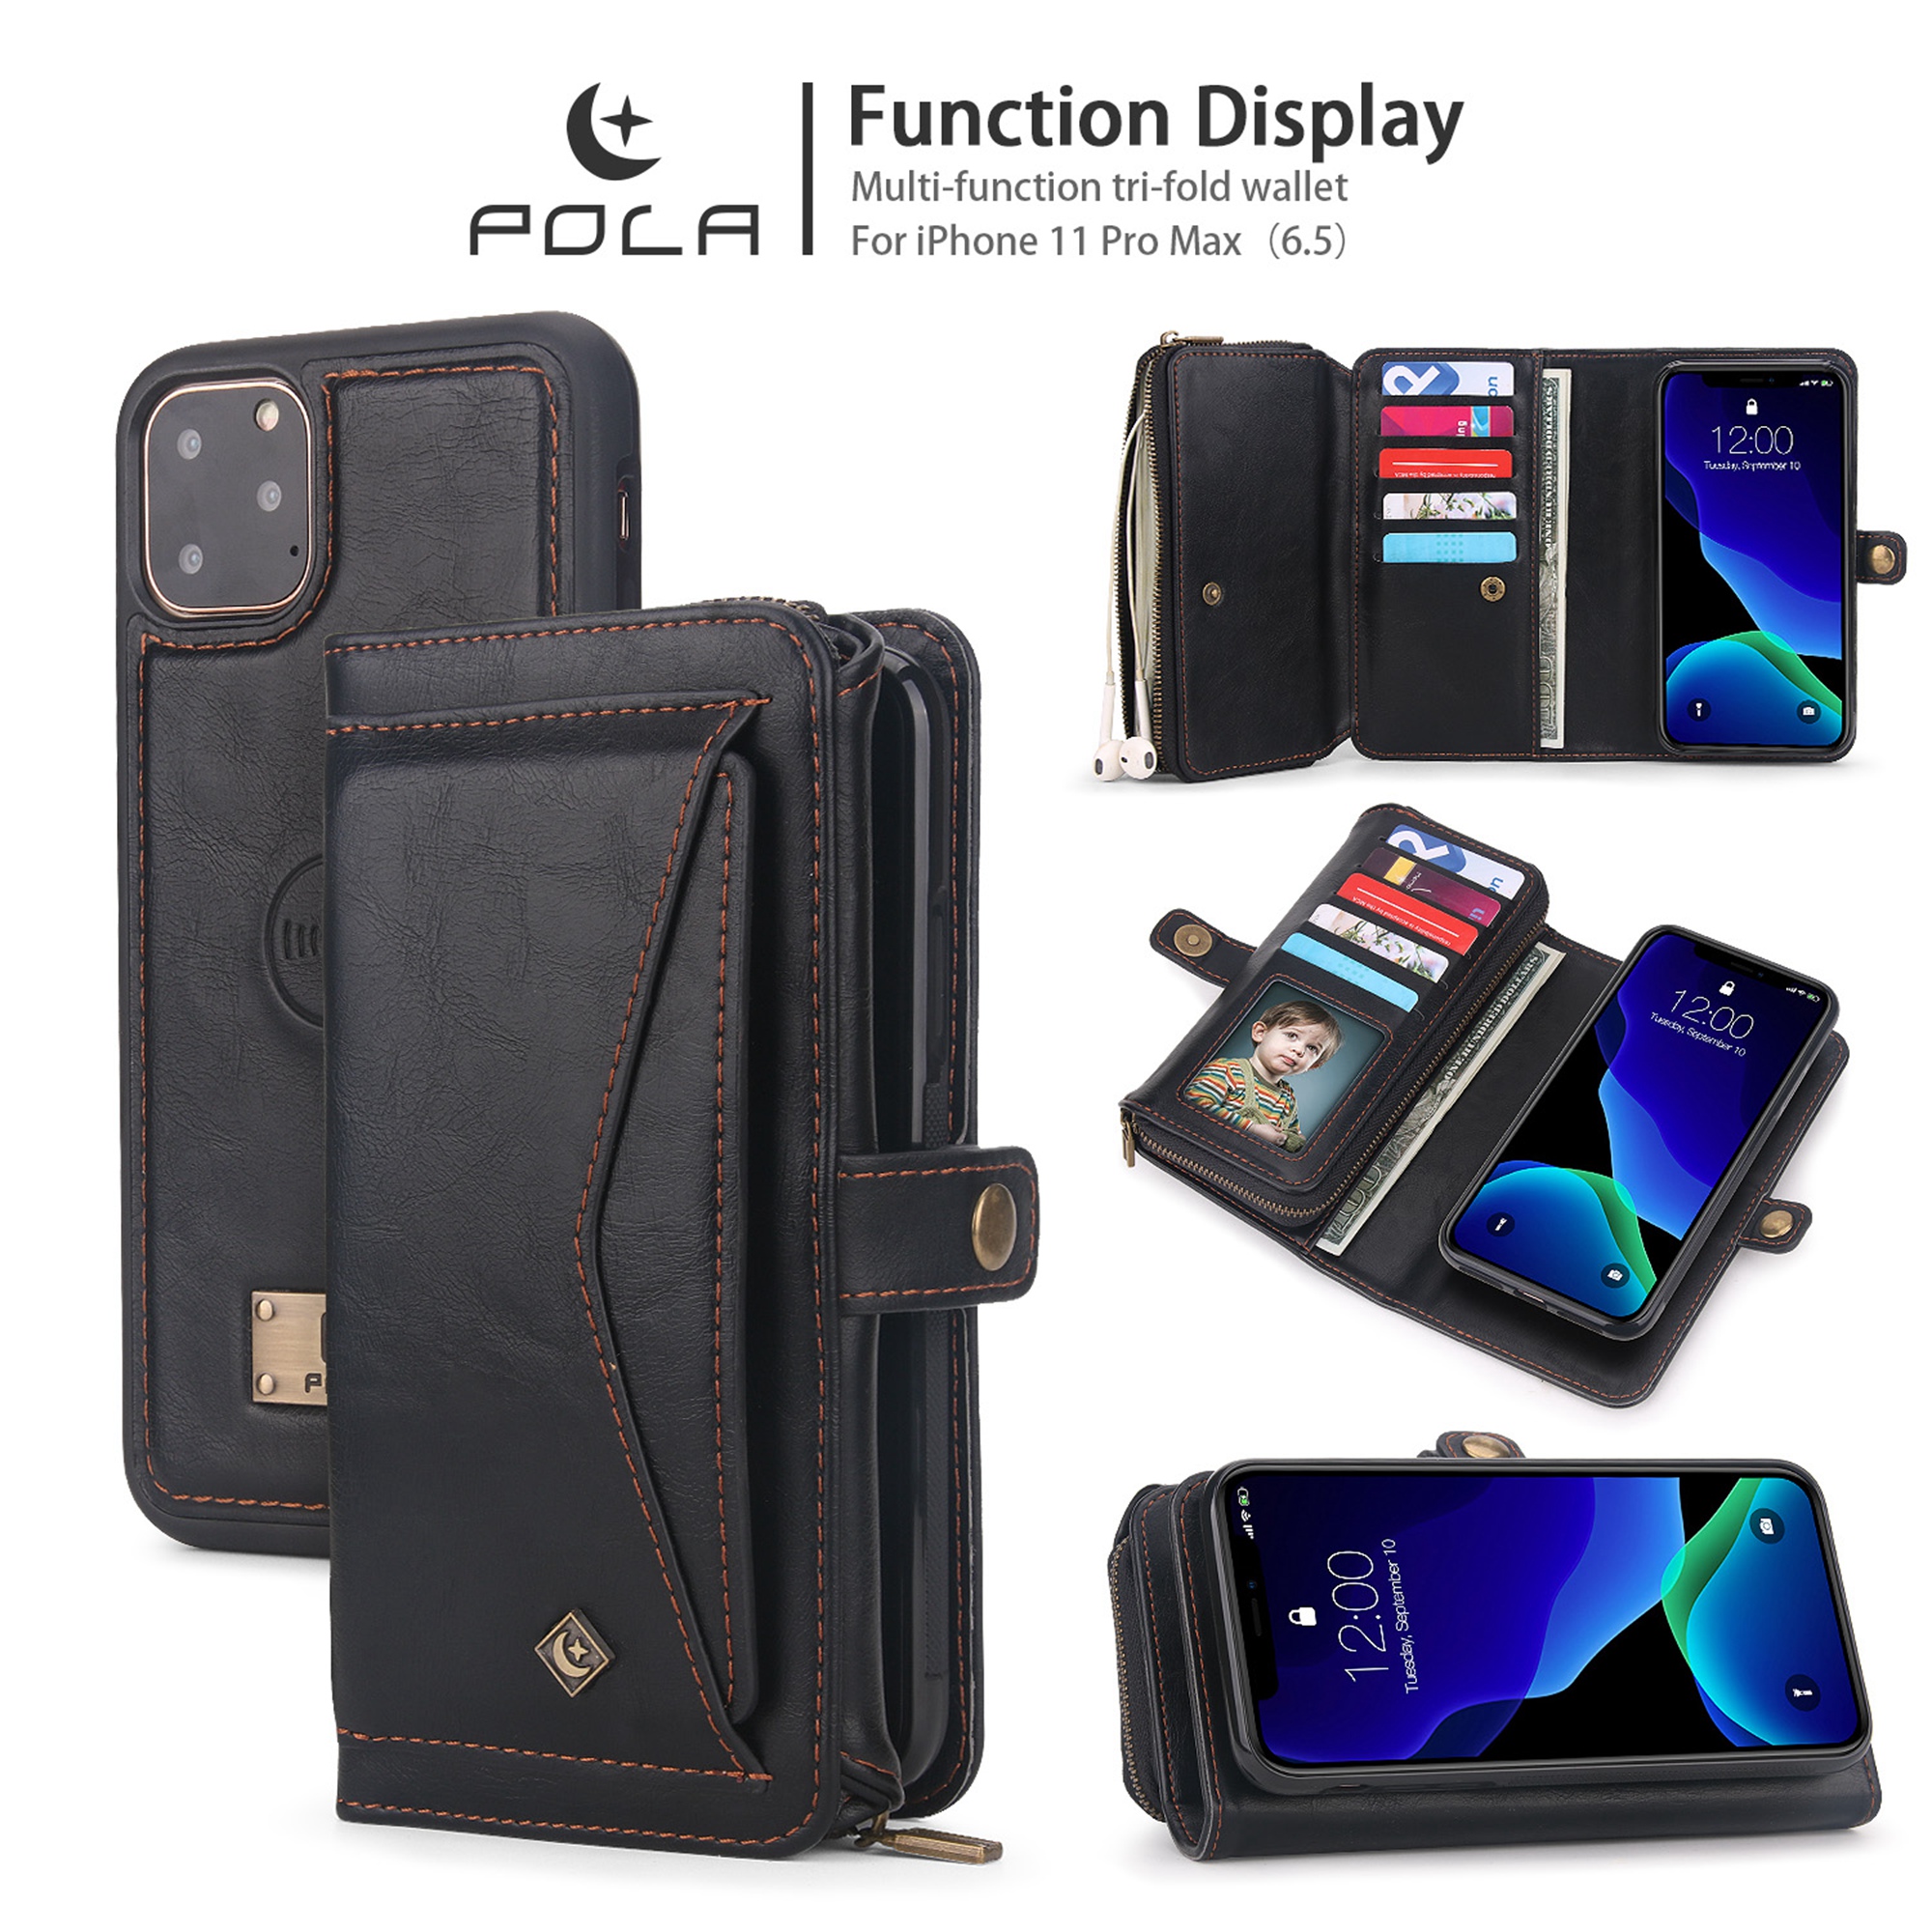 iPhone 11Pro Max 6.5 inch Wallet Case, Dteck 2 in 1 Leather Zipper Purse Multi-Function Tri-fold Wallet Case Detachable Magnetic Phone Cover with 14 Card Slots Money Pocket For iPhone 11 Pro Max,Black - image 1 of 11